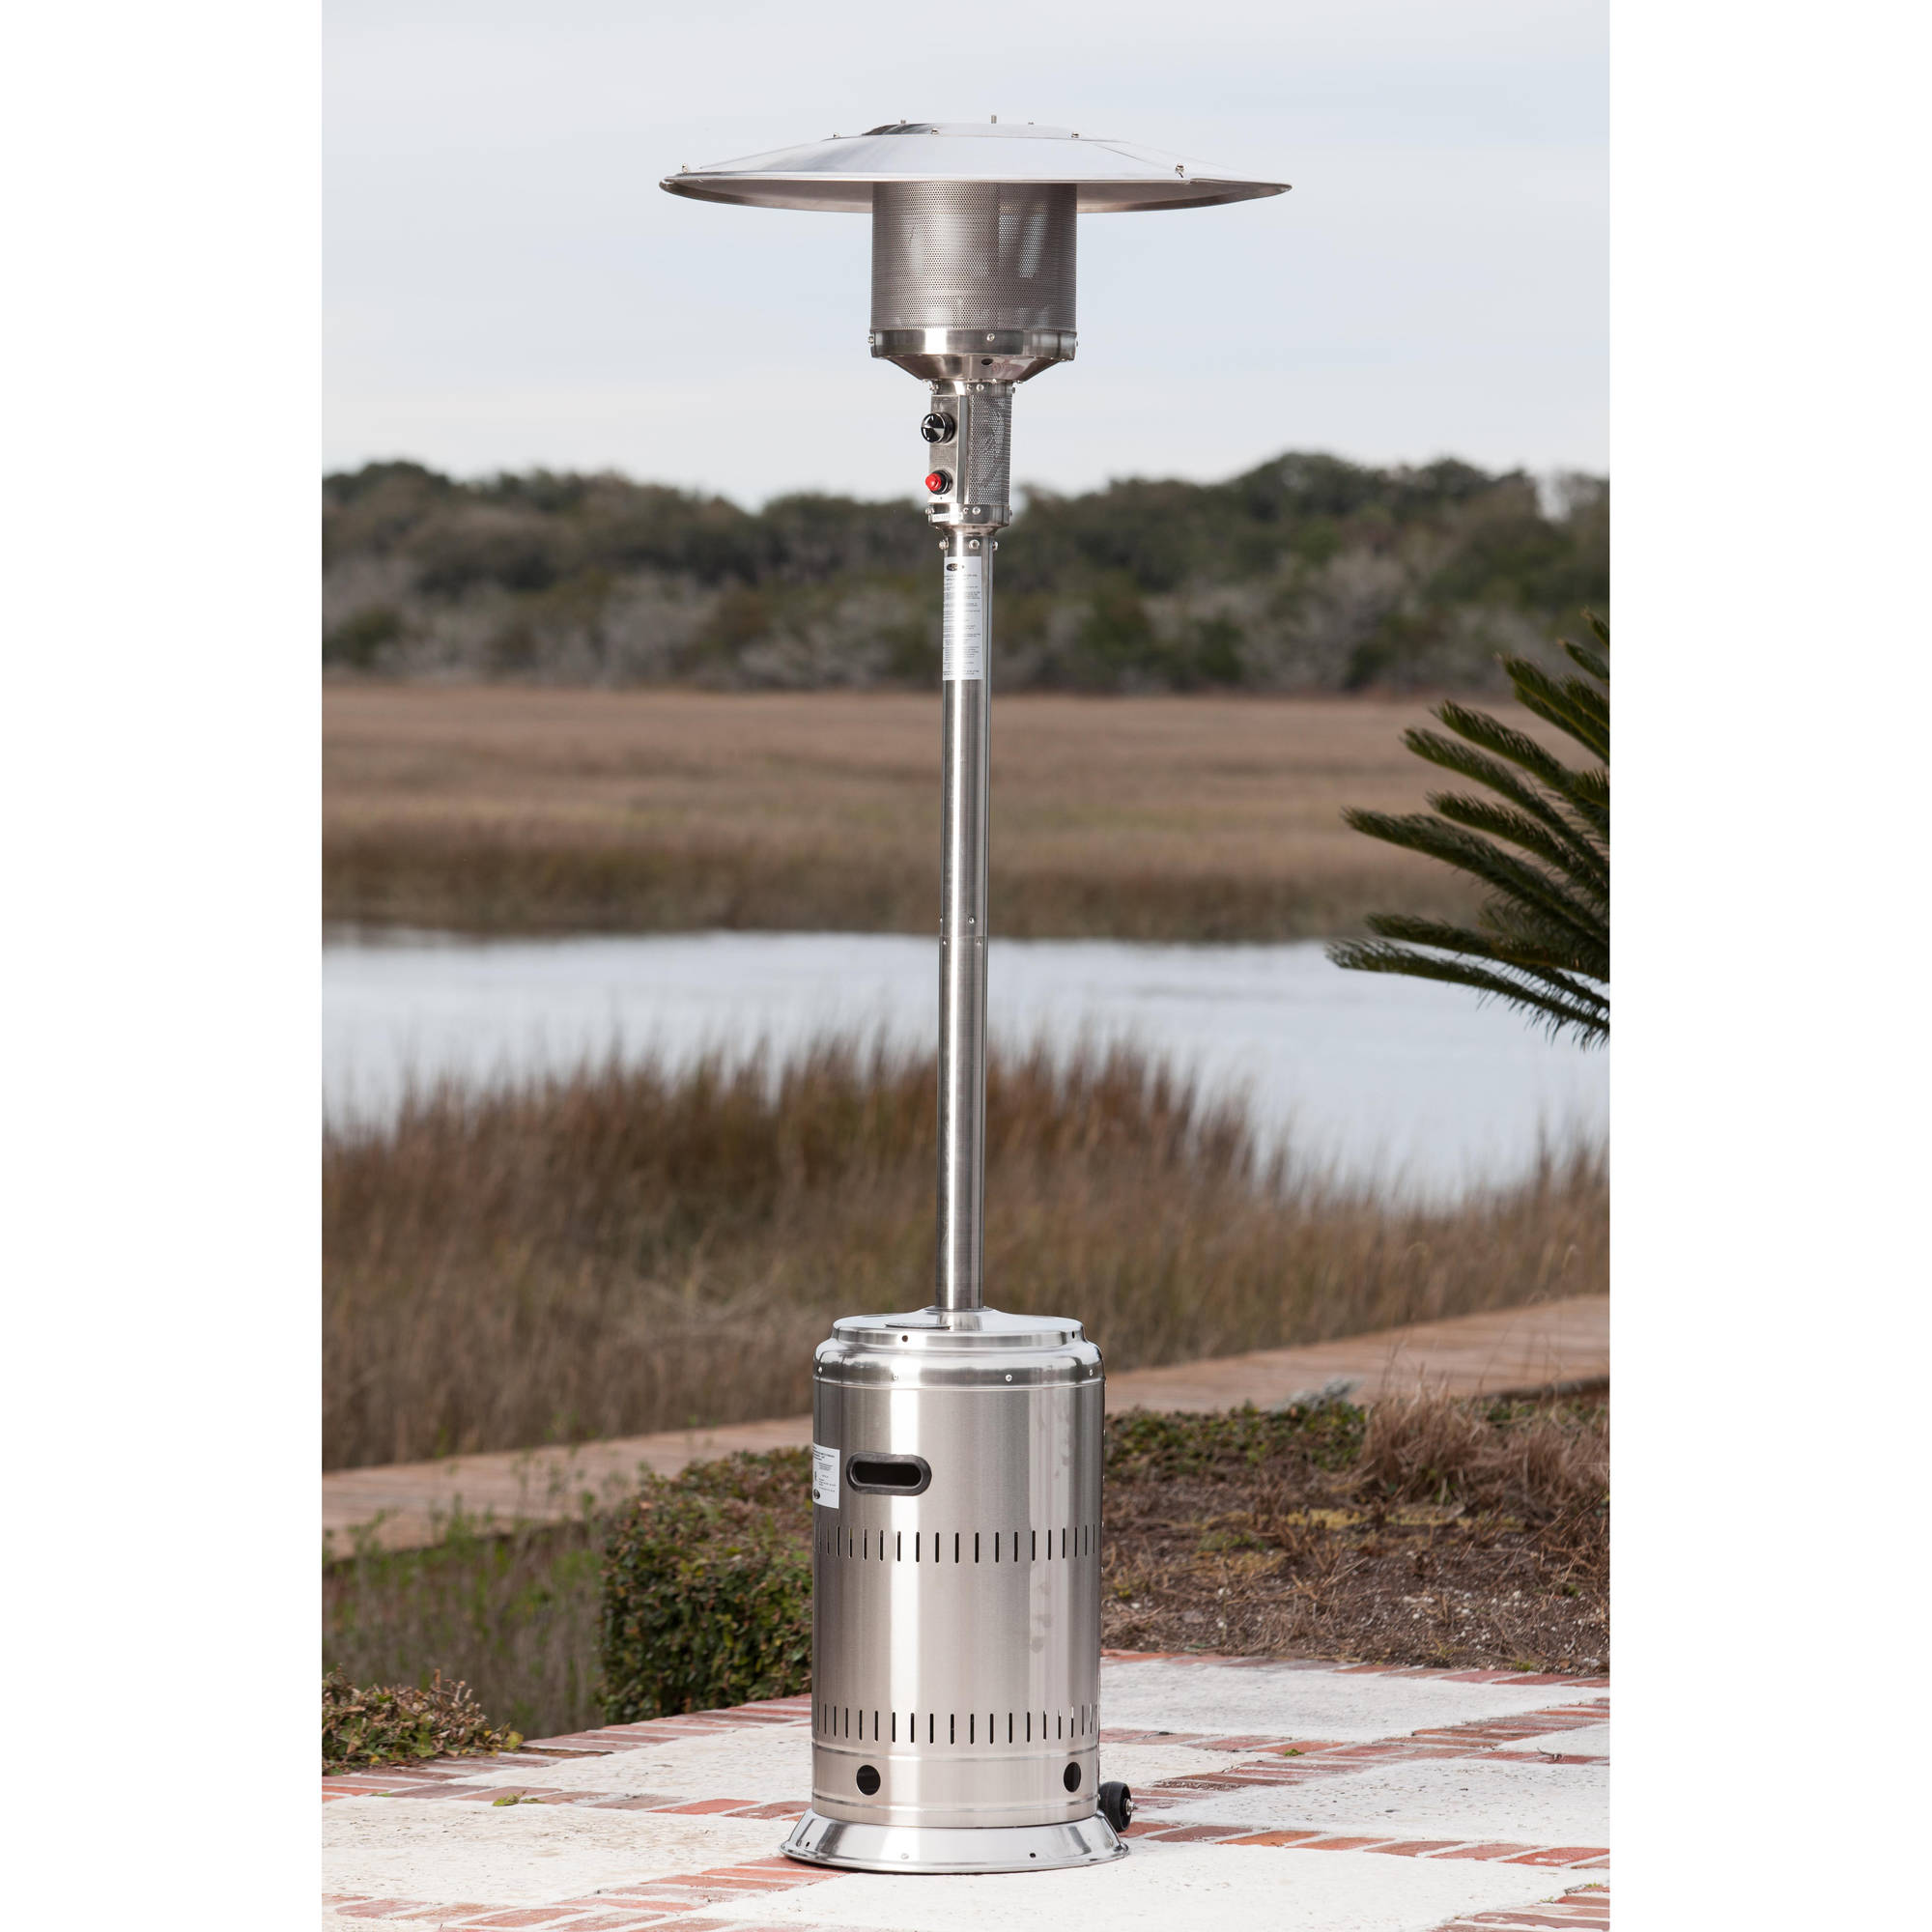 Fire Sense Stainless Steel Commercial Patio Heater - image 4 of 8